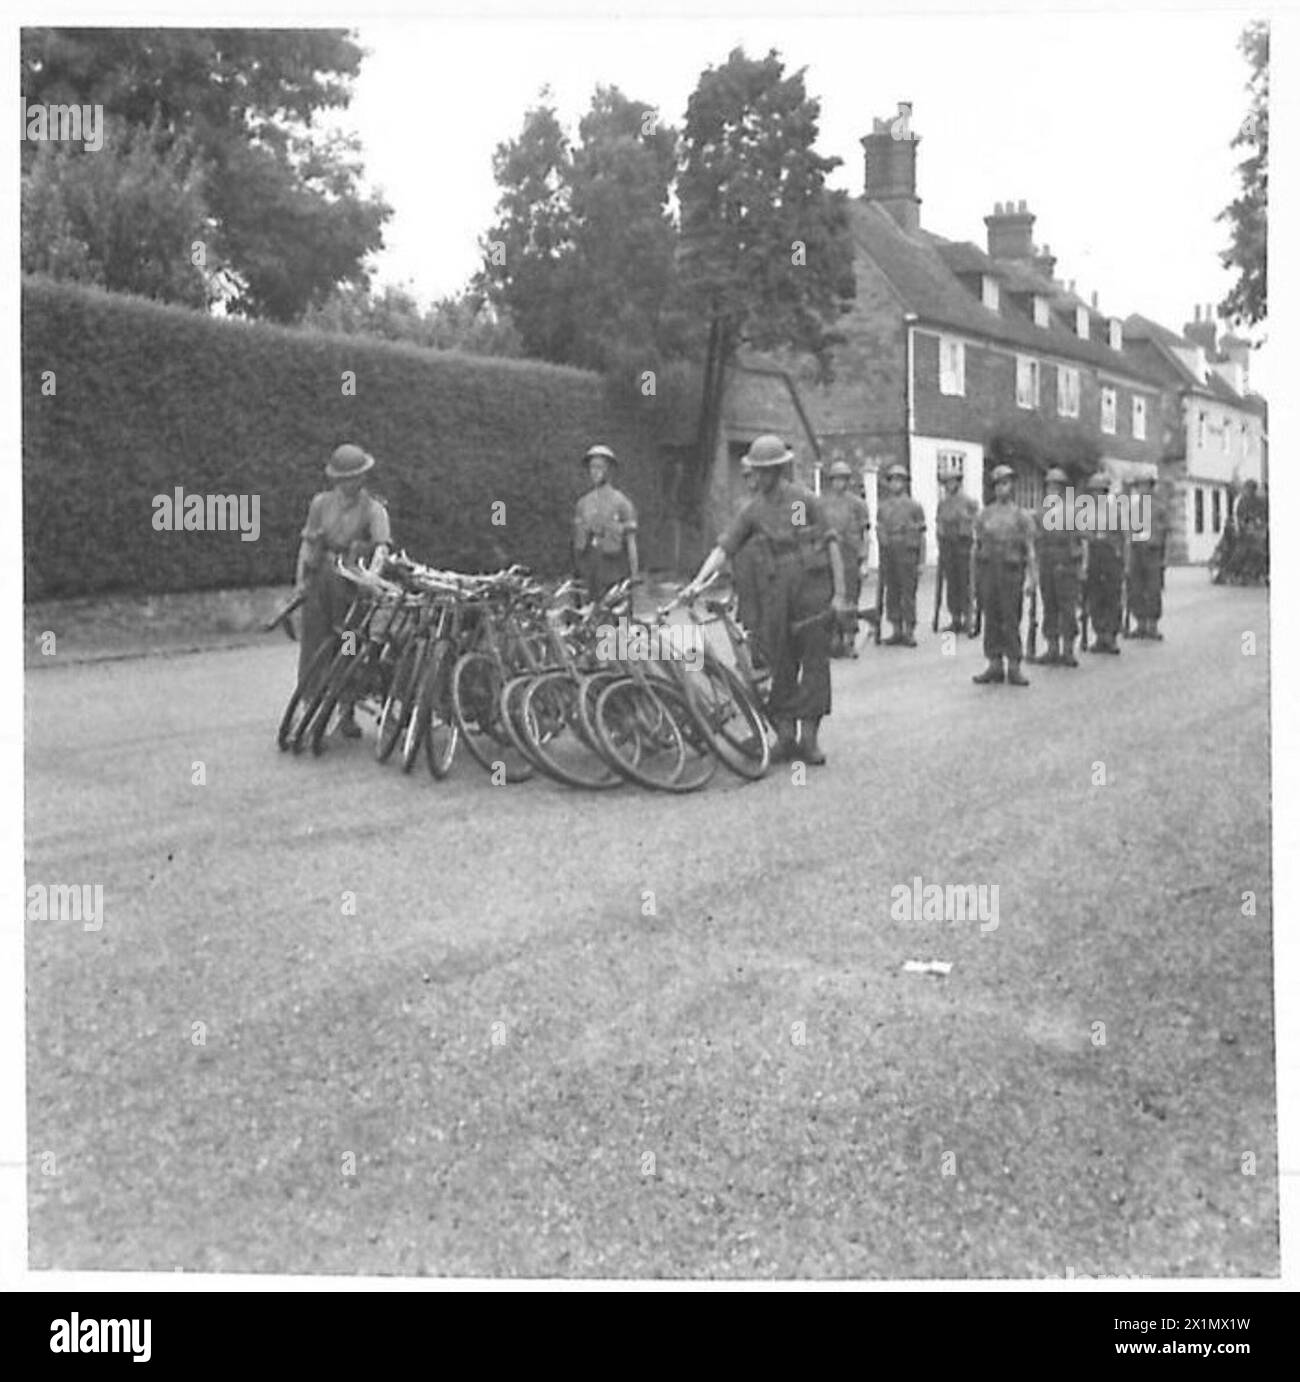 SOLDIER CYCLISTS - 'Pile Cyclists'. Members of the platoon pile their cycles, British Army Stock Photo